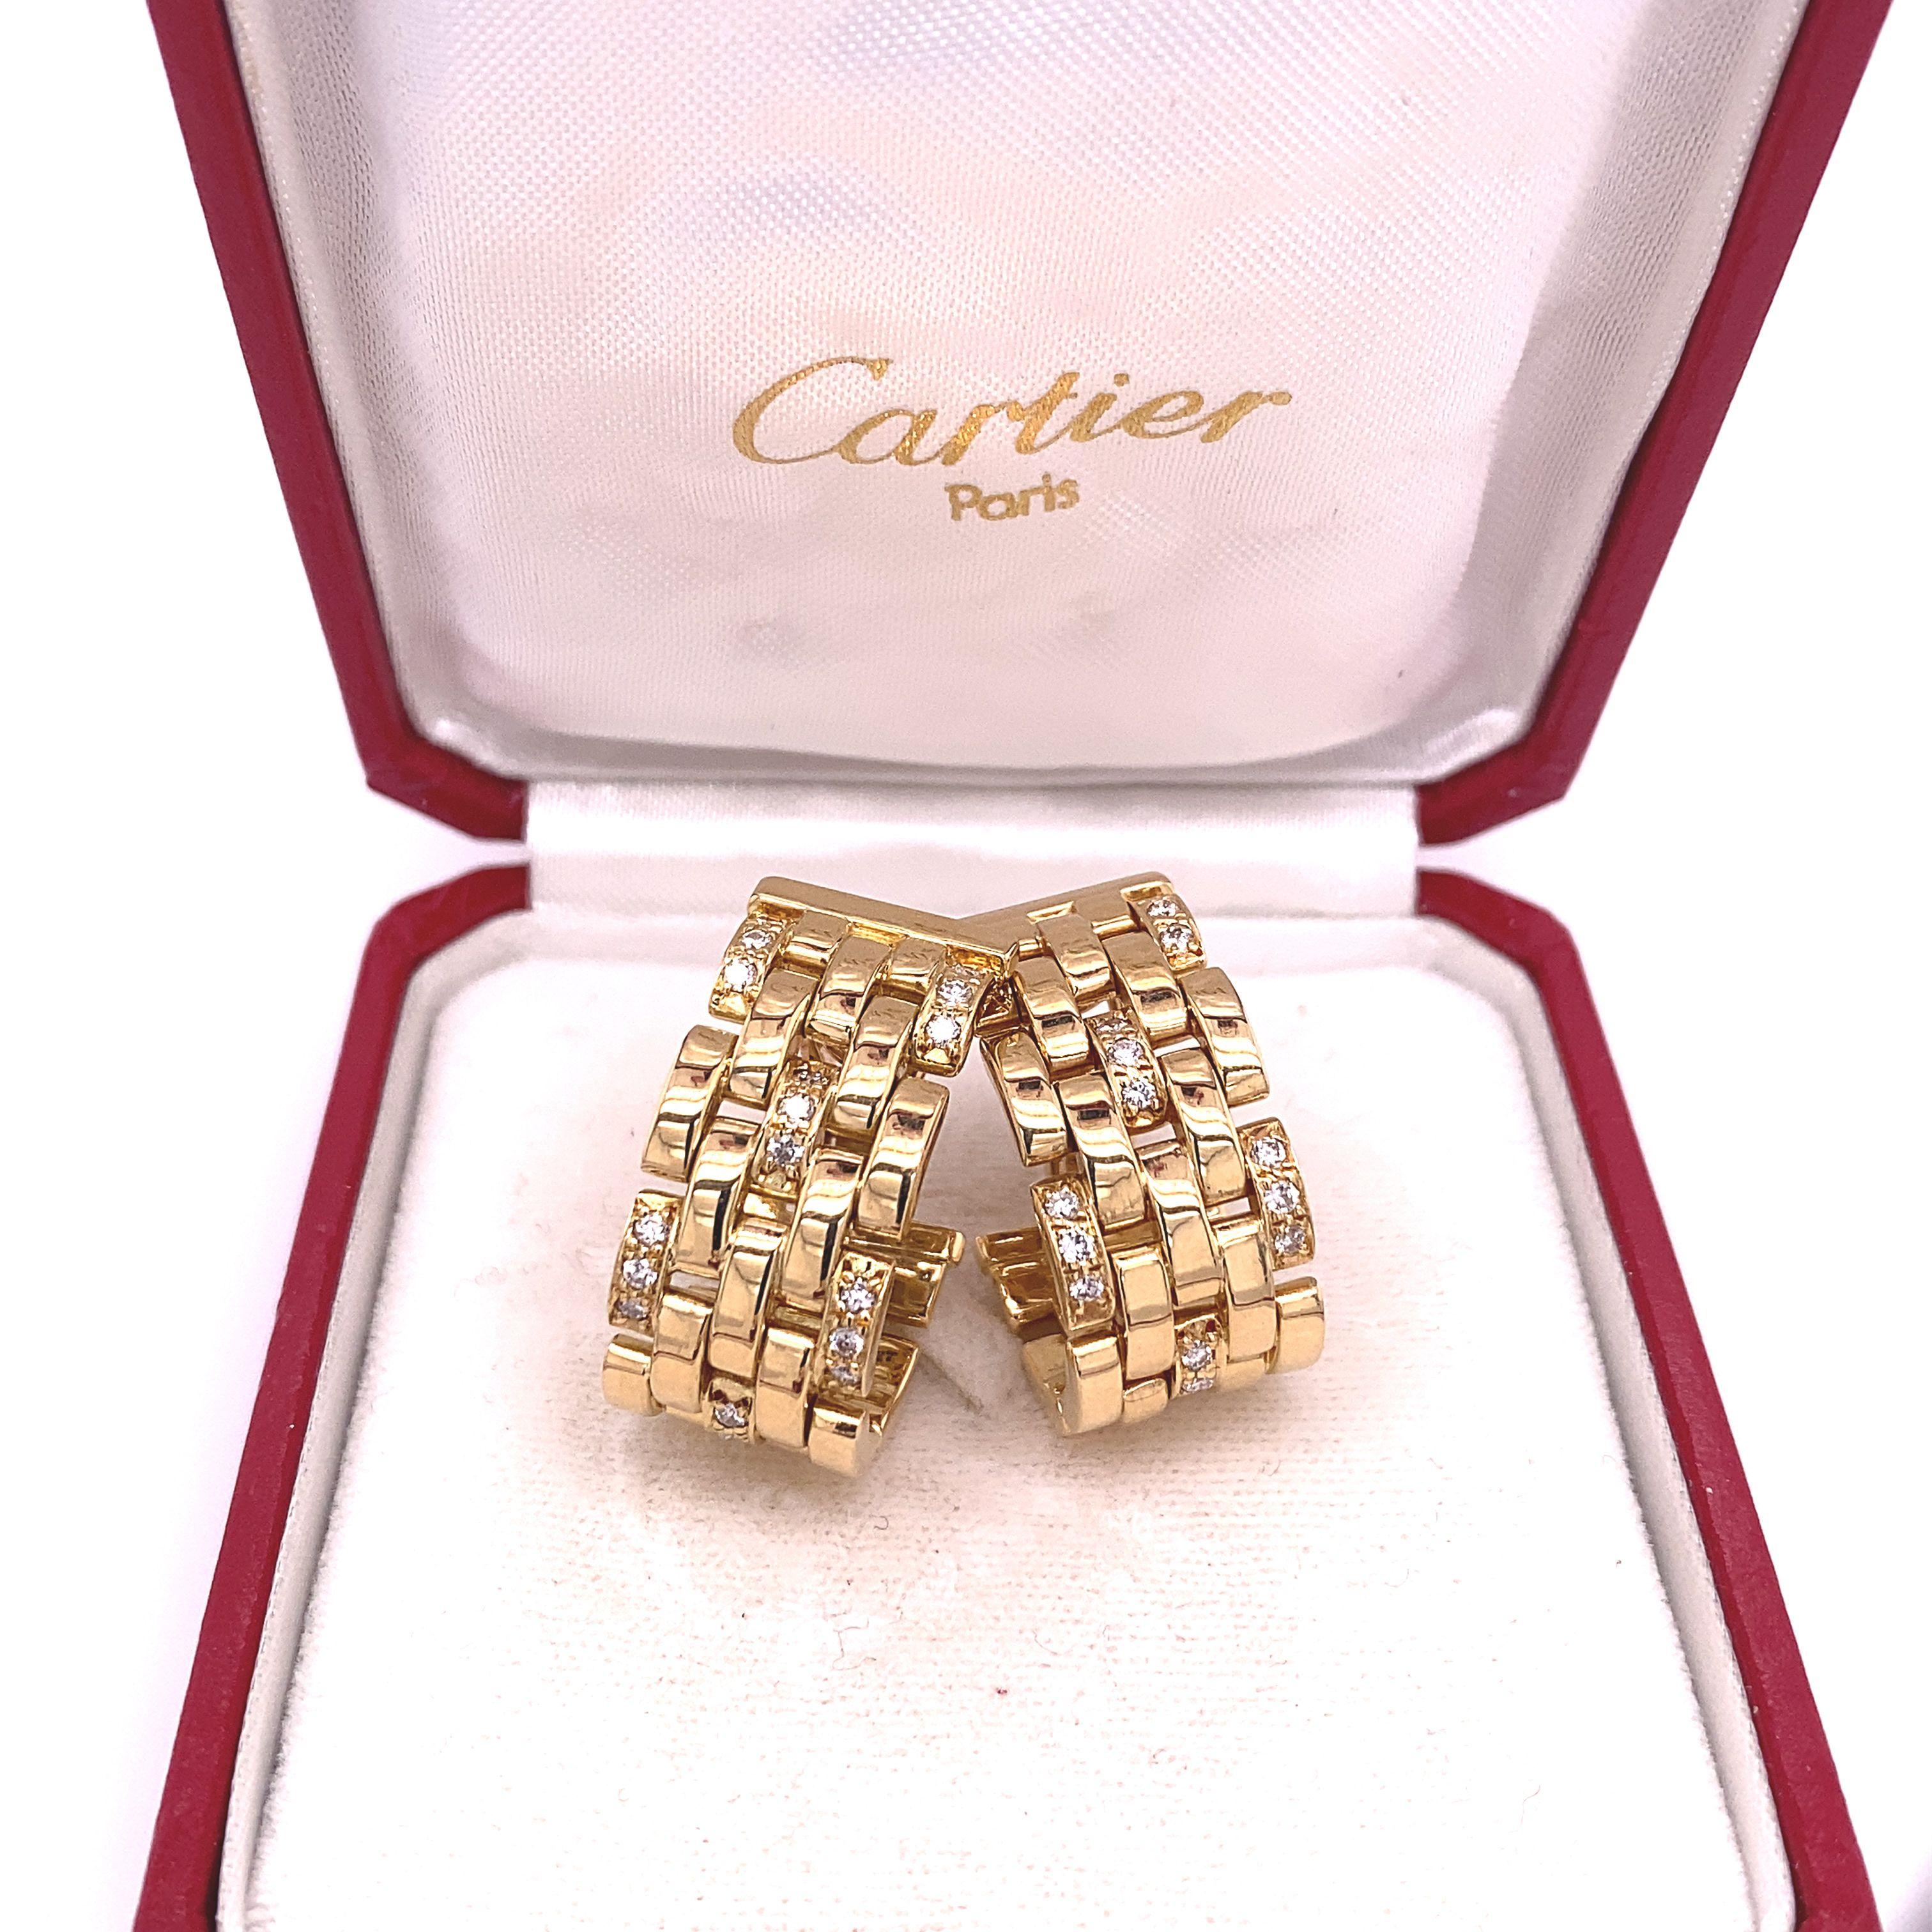 The Cartier Maillon Panthere earrings have everything you could ever want in a pair of earrings. The diamonds are an amazing 0.50ct total weight and the earrings are 5-row 18ct yellow gold hoops.
Total Diamond Weight: 0.50ct
Diamond Color: